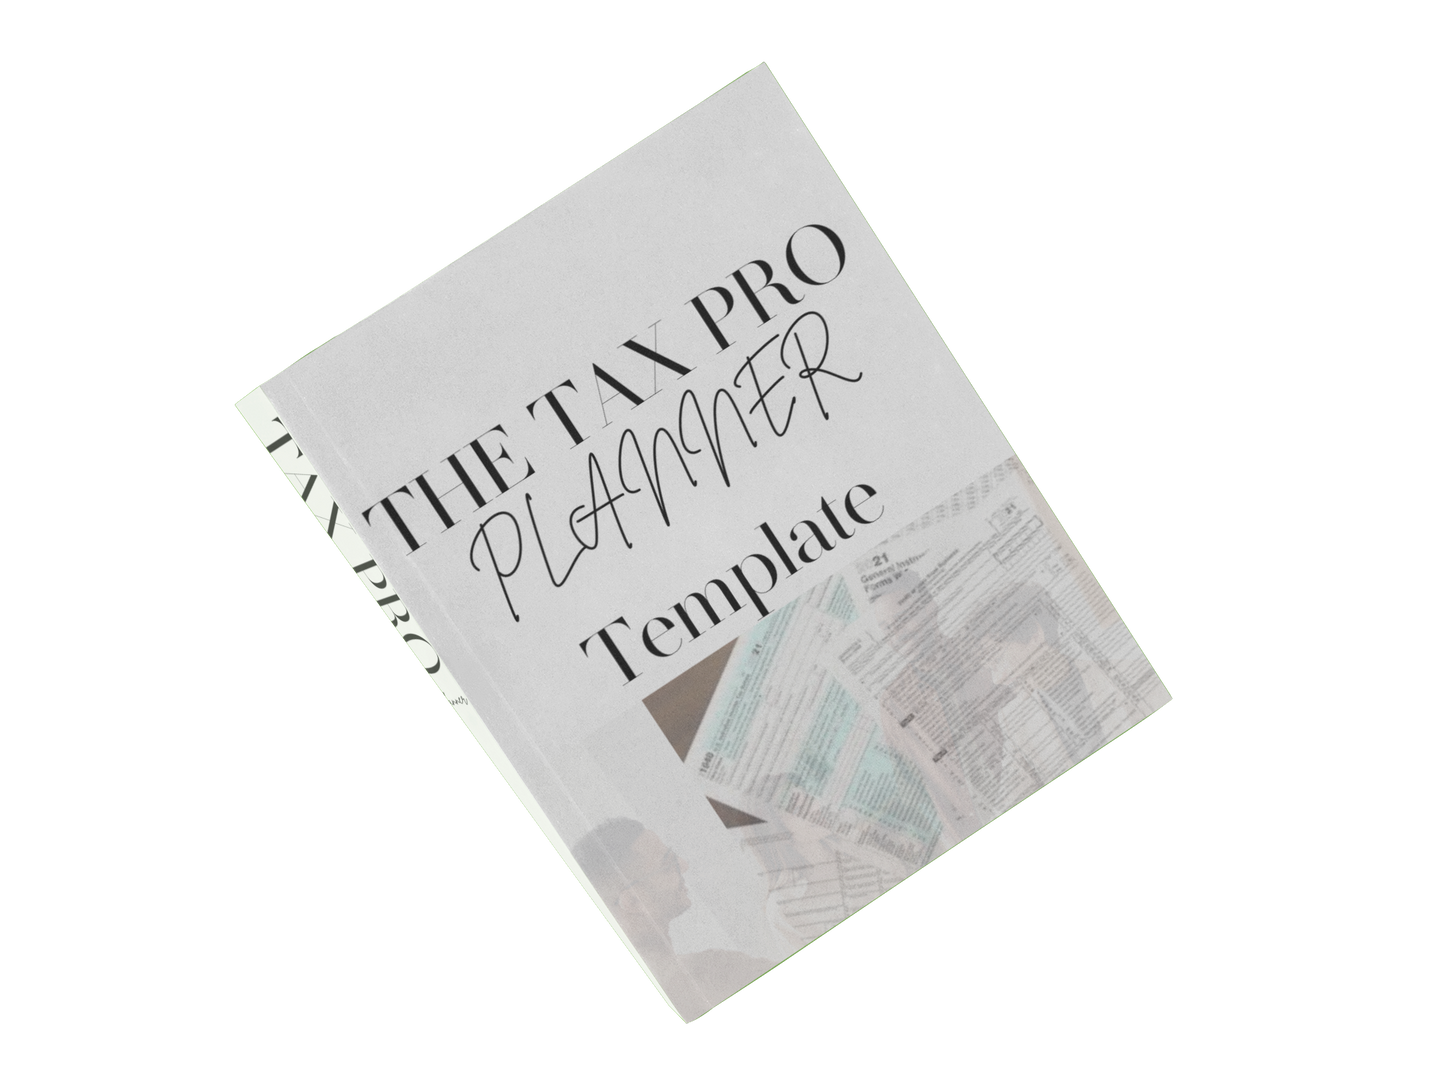 Tax Pro Planner Template